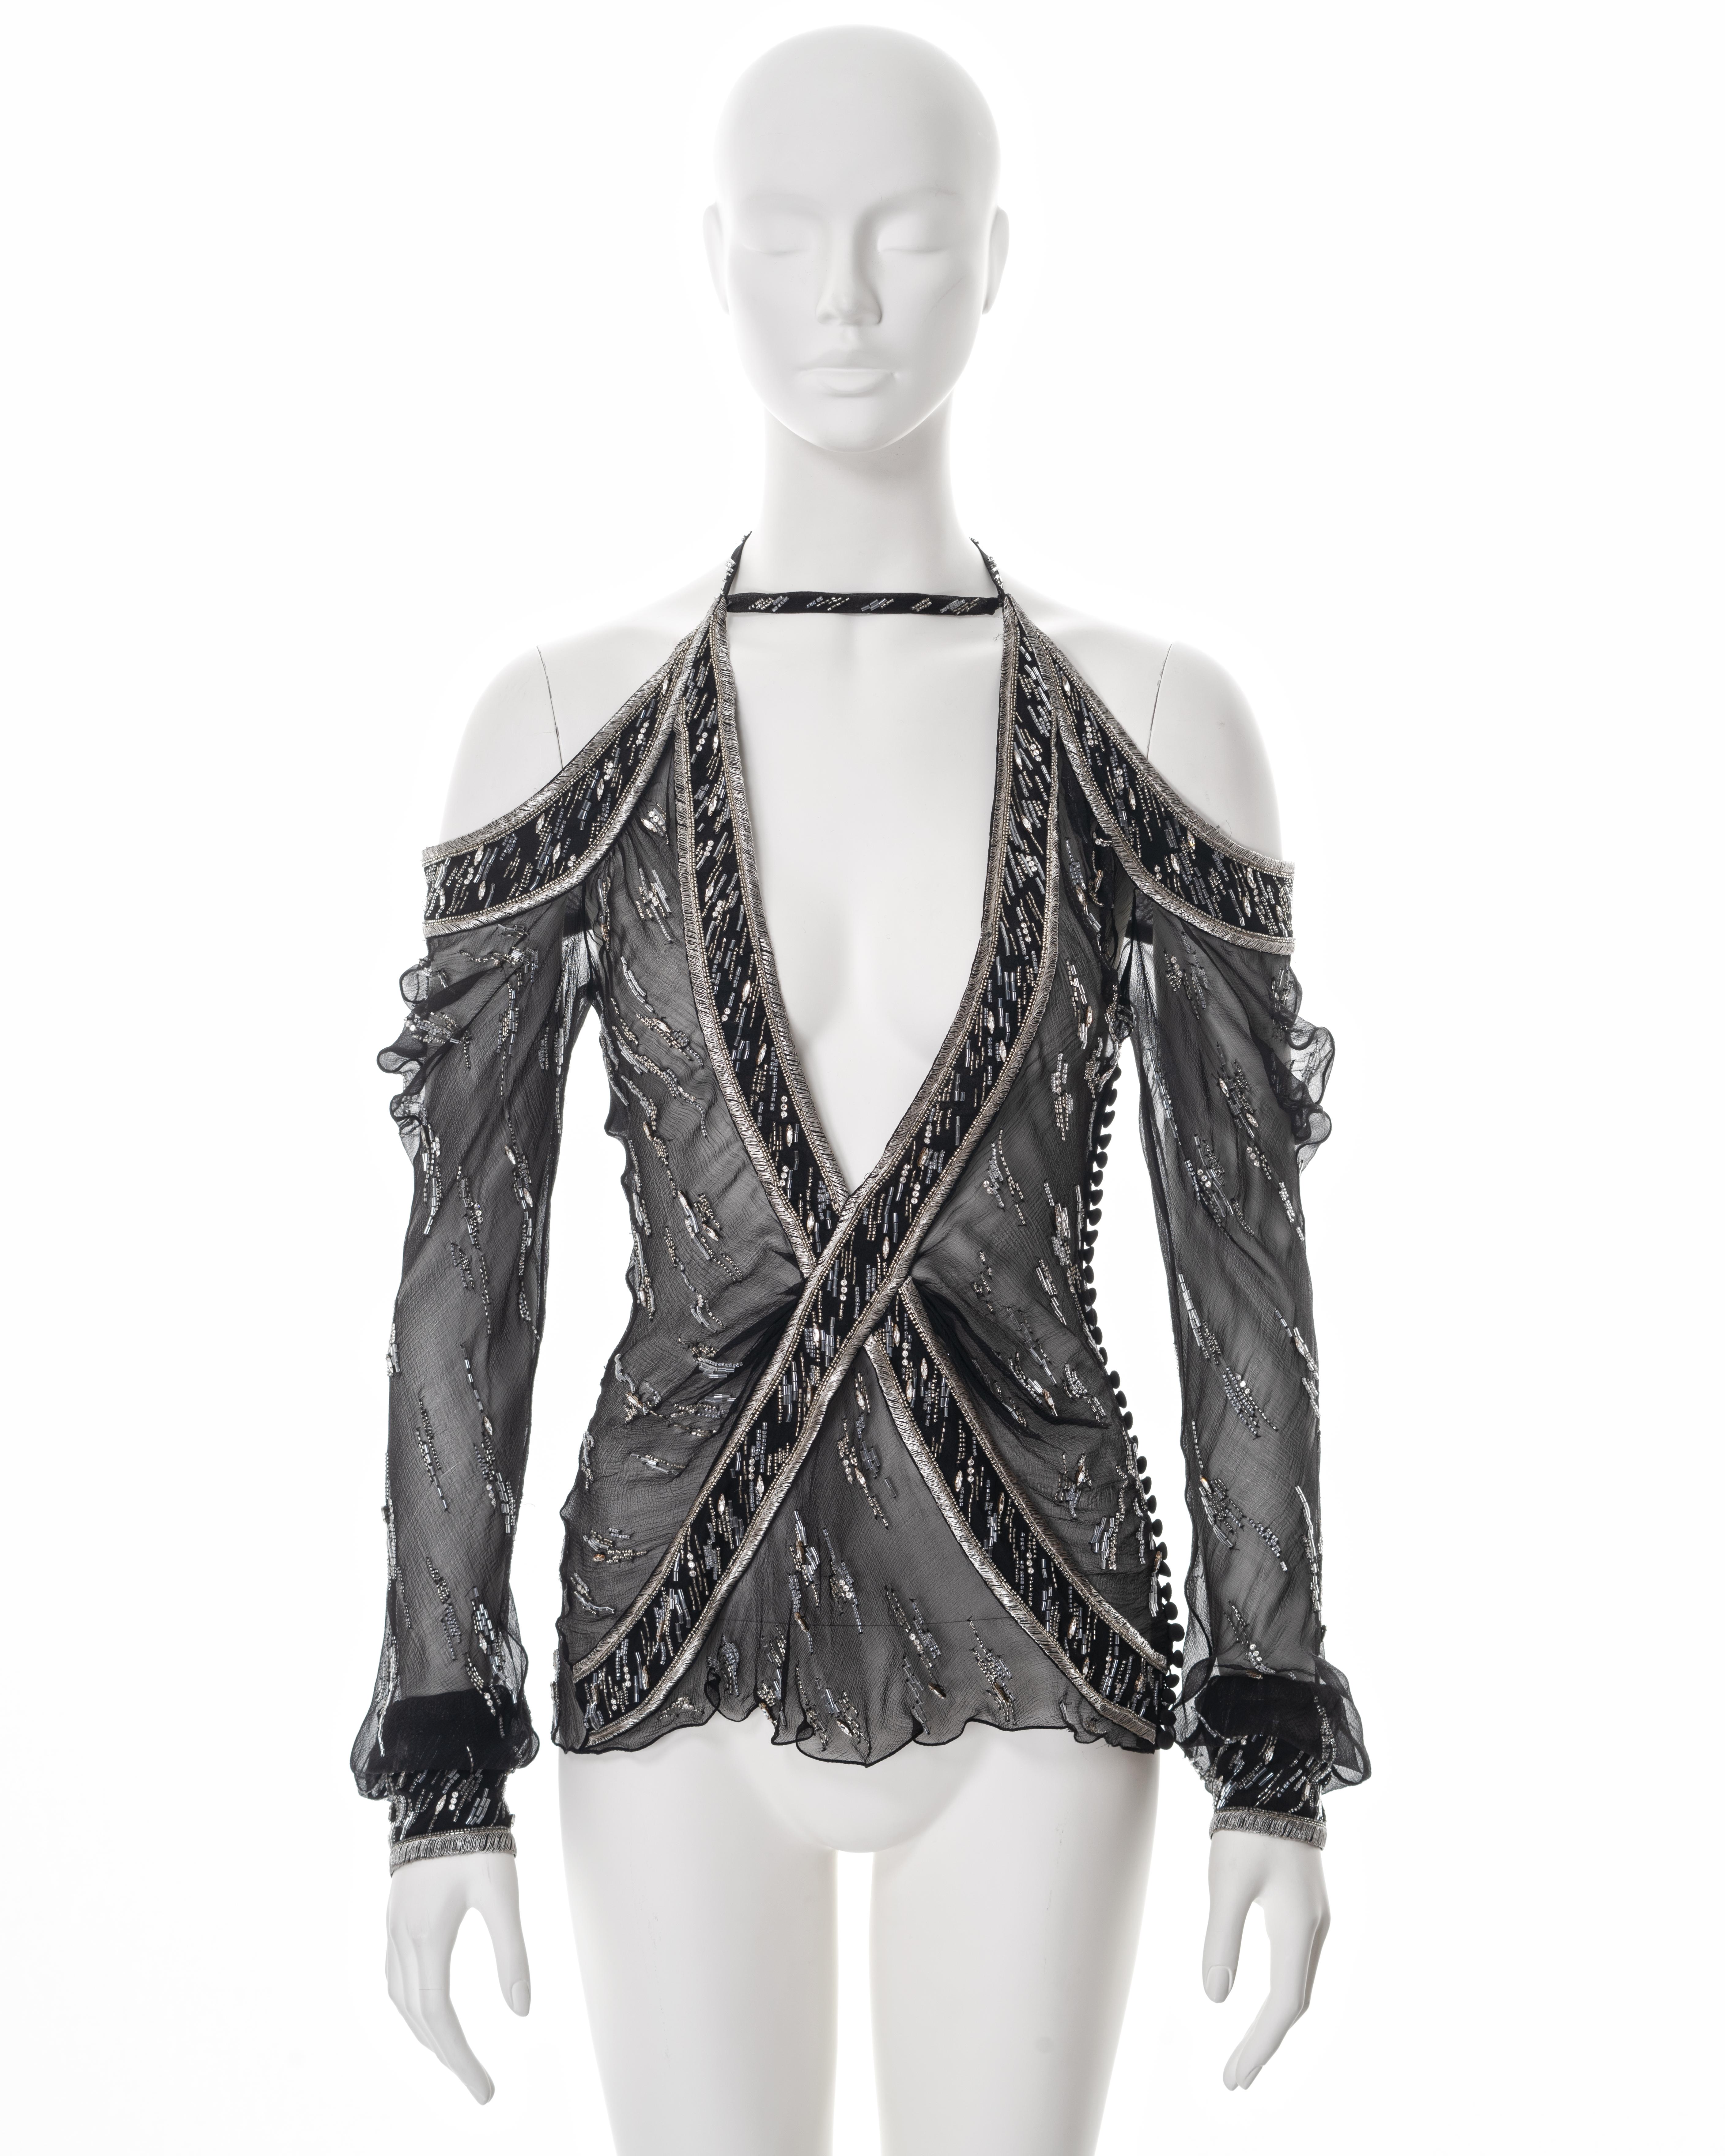 ▪ Christian Dior evening blouse
▪ Creative Director: John Galliano
▪ Sold by One of a Kind Archive
▪ Spring-Summer 2005
▪ Constructed from black bias-cut silk chiffon 
▪ Embellished with glass beads 
▪ Metallic silver metal thread embroidery 
▪